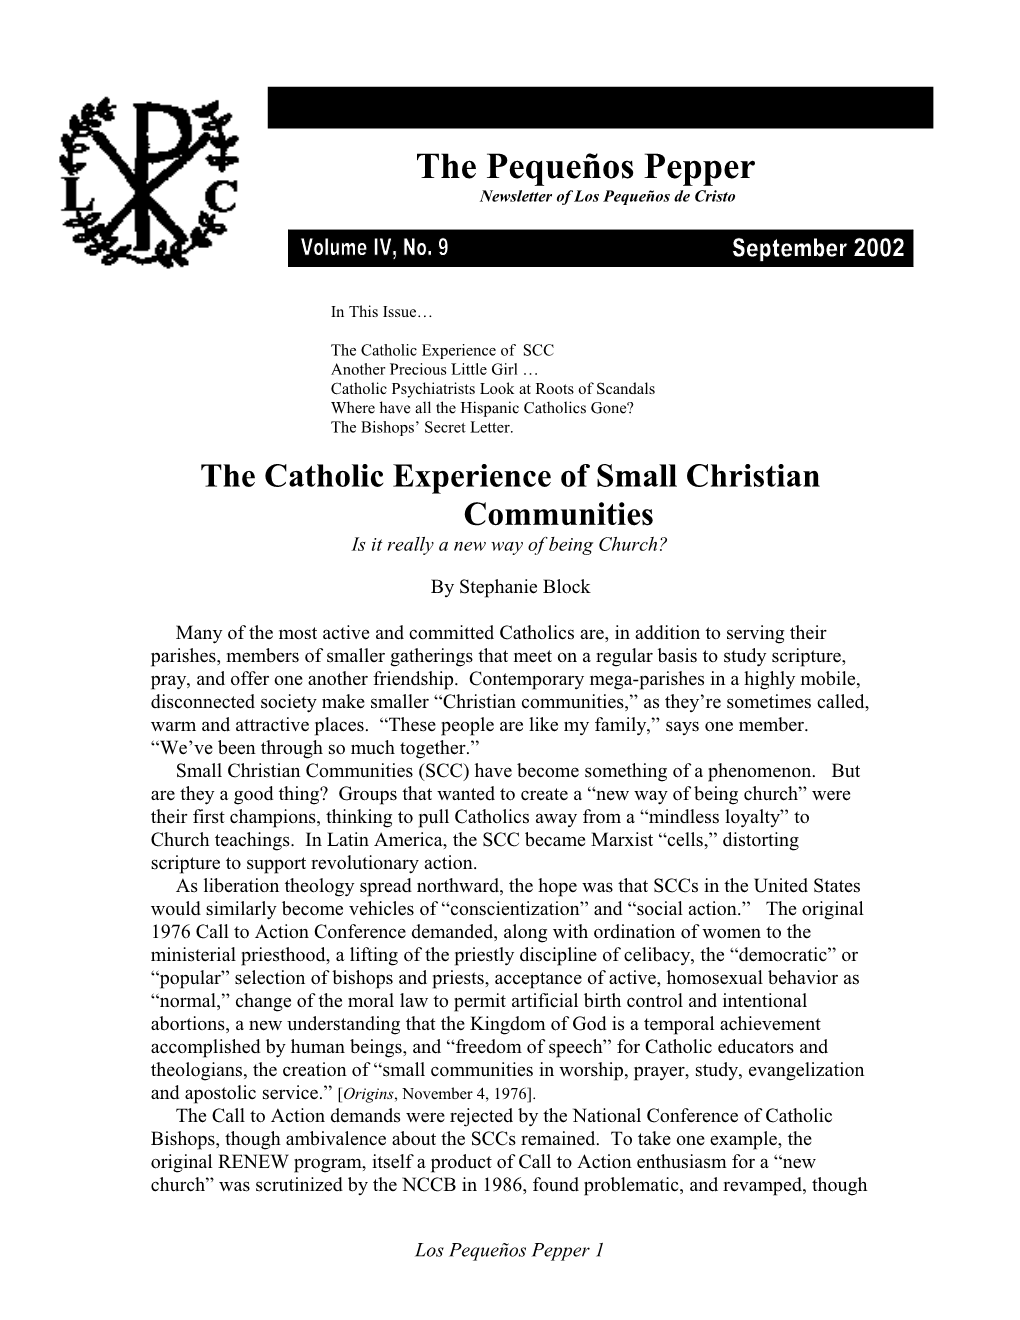 The Catholic Experience of SCC